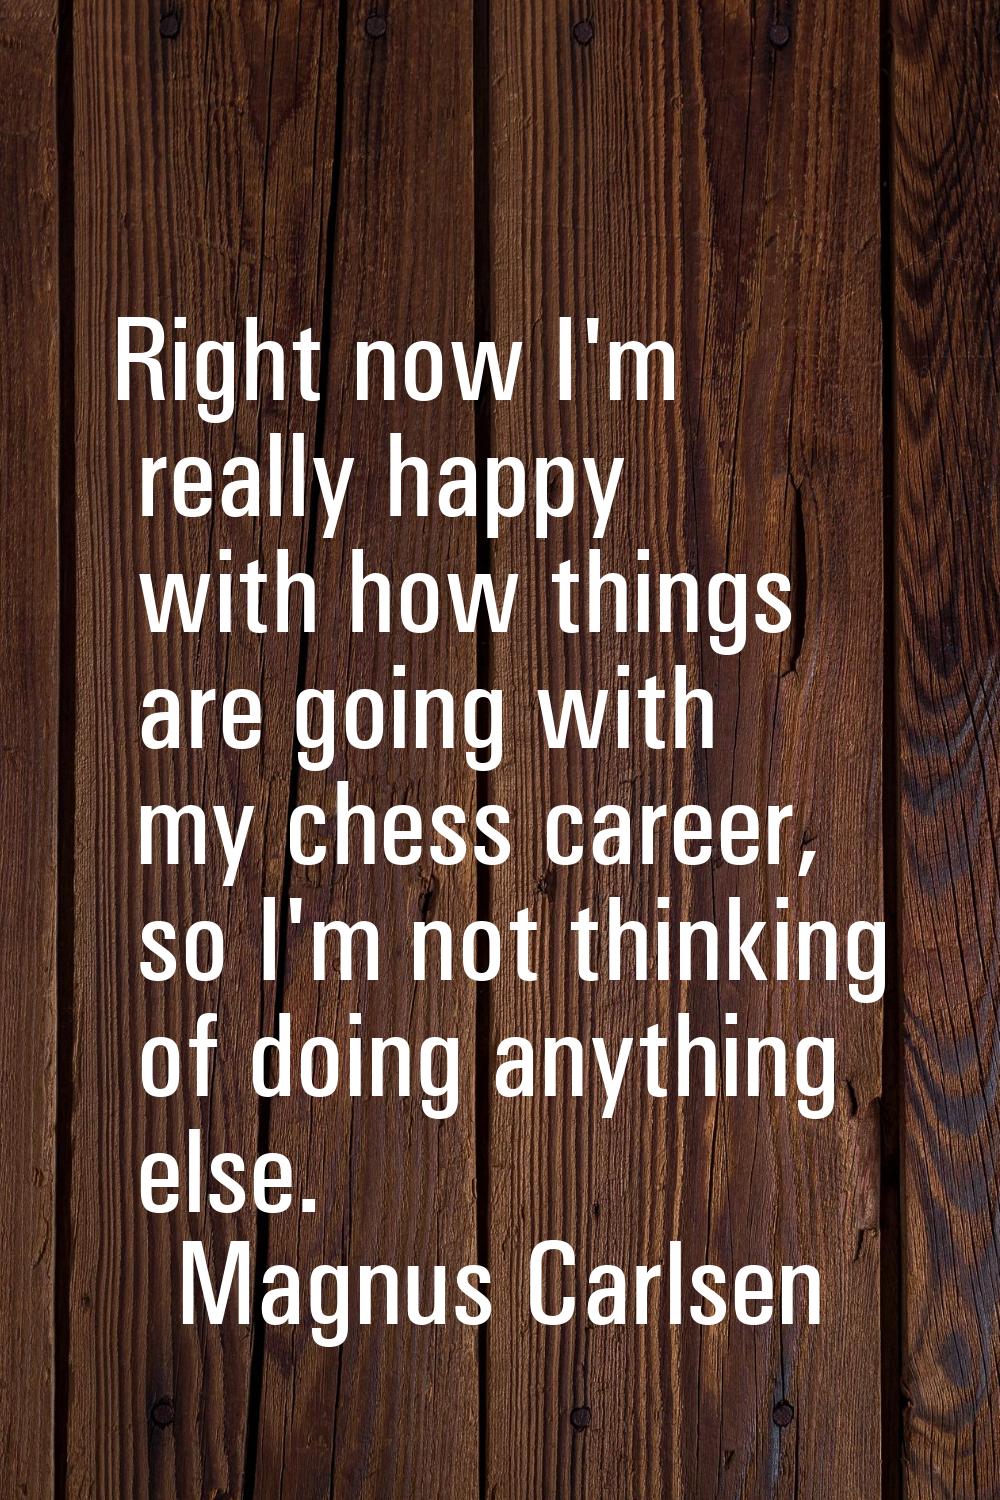 Right now I'm really happy with how things are going with my chess career, so I'm not thinking of d